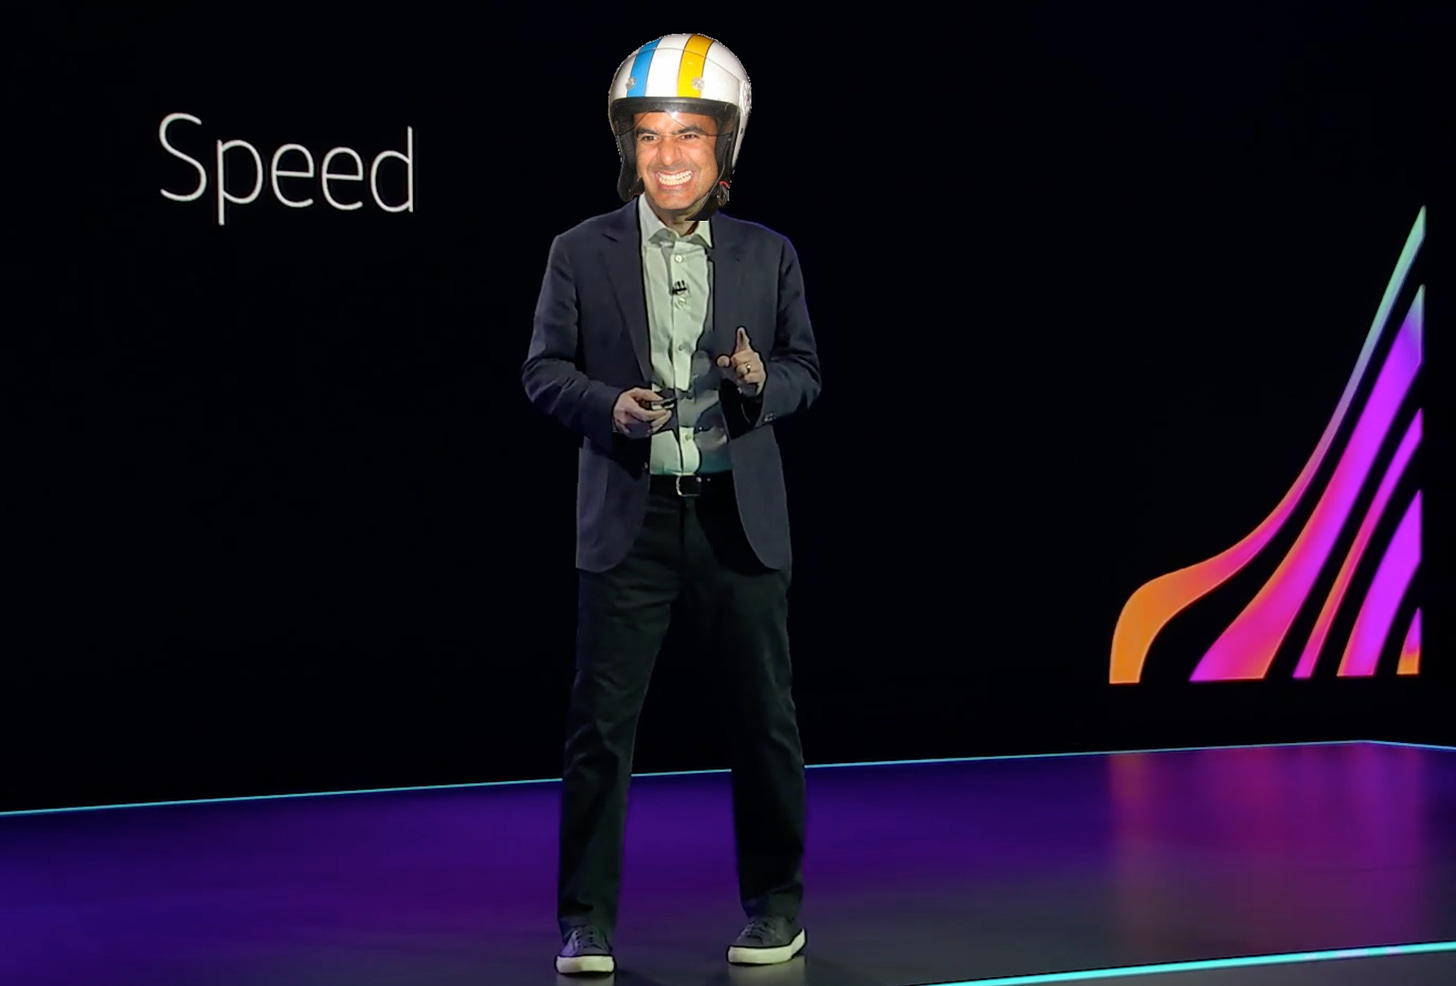 My re:Invent keynote where all I talk about is moving fast and wearing a helmet